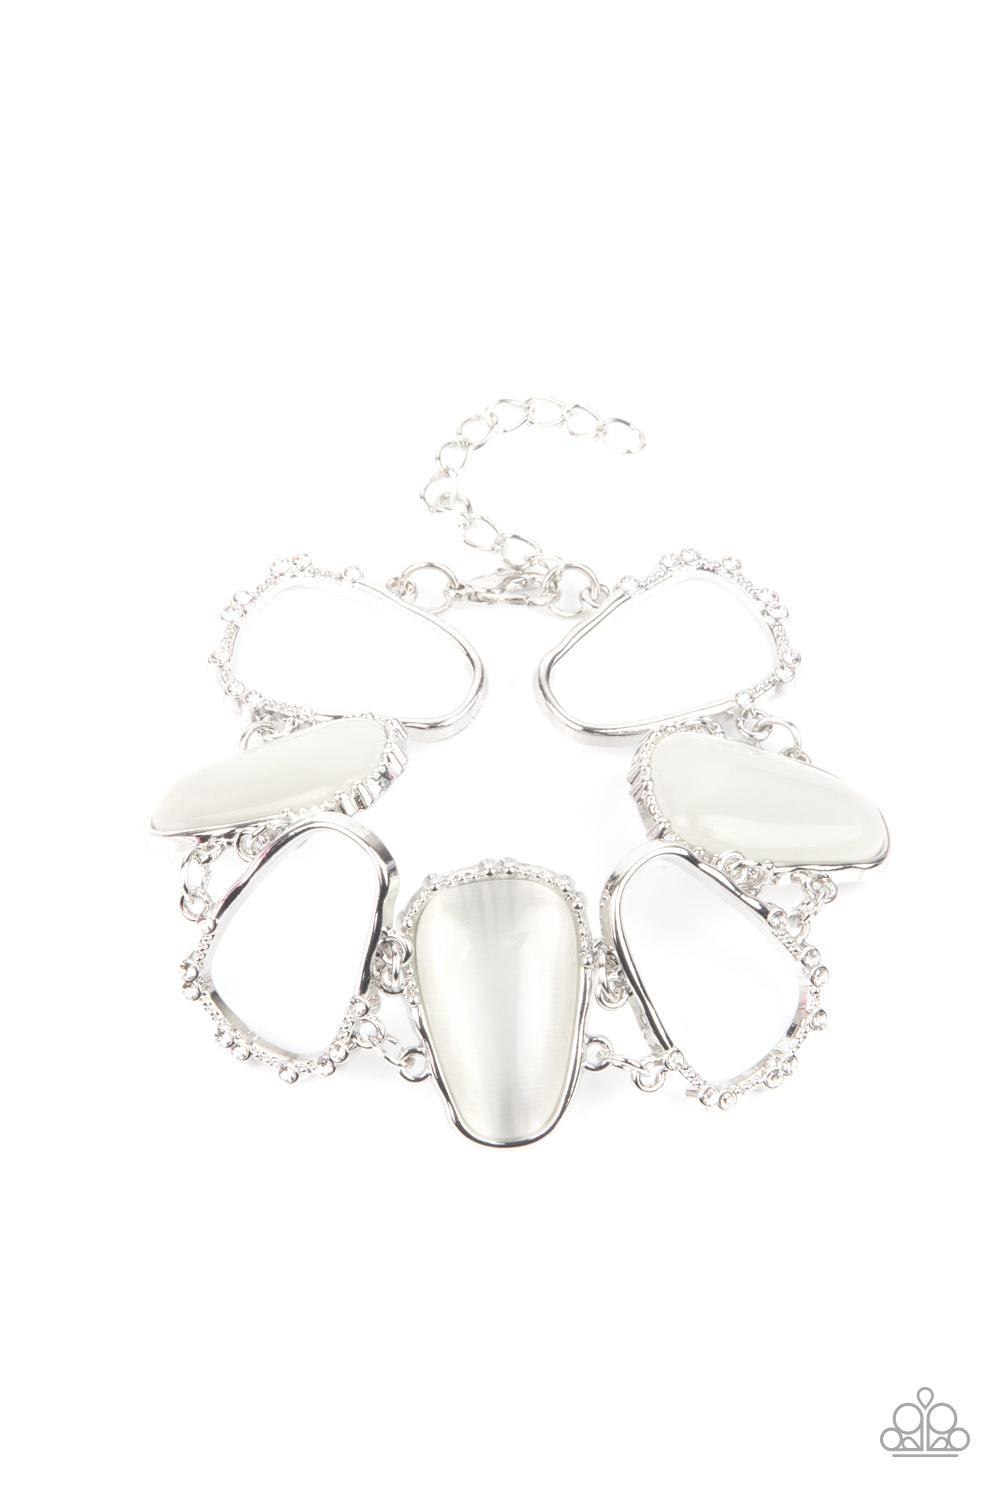 Paparazzi Accessories Yacht Club Couture - White Encased in studded silver frames, a tranquil collection of asymmetrical white cat’s eye stone teardrops and airy silver frames delicately link around the wrist for an ethereally sparkly display. A sprinklin